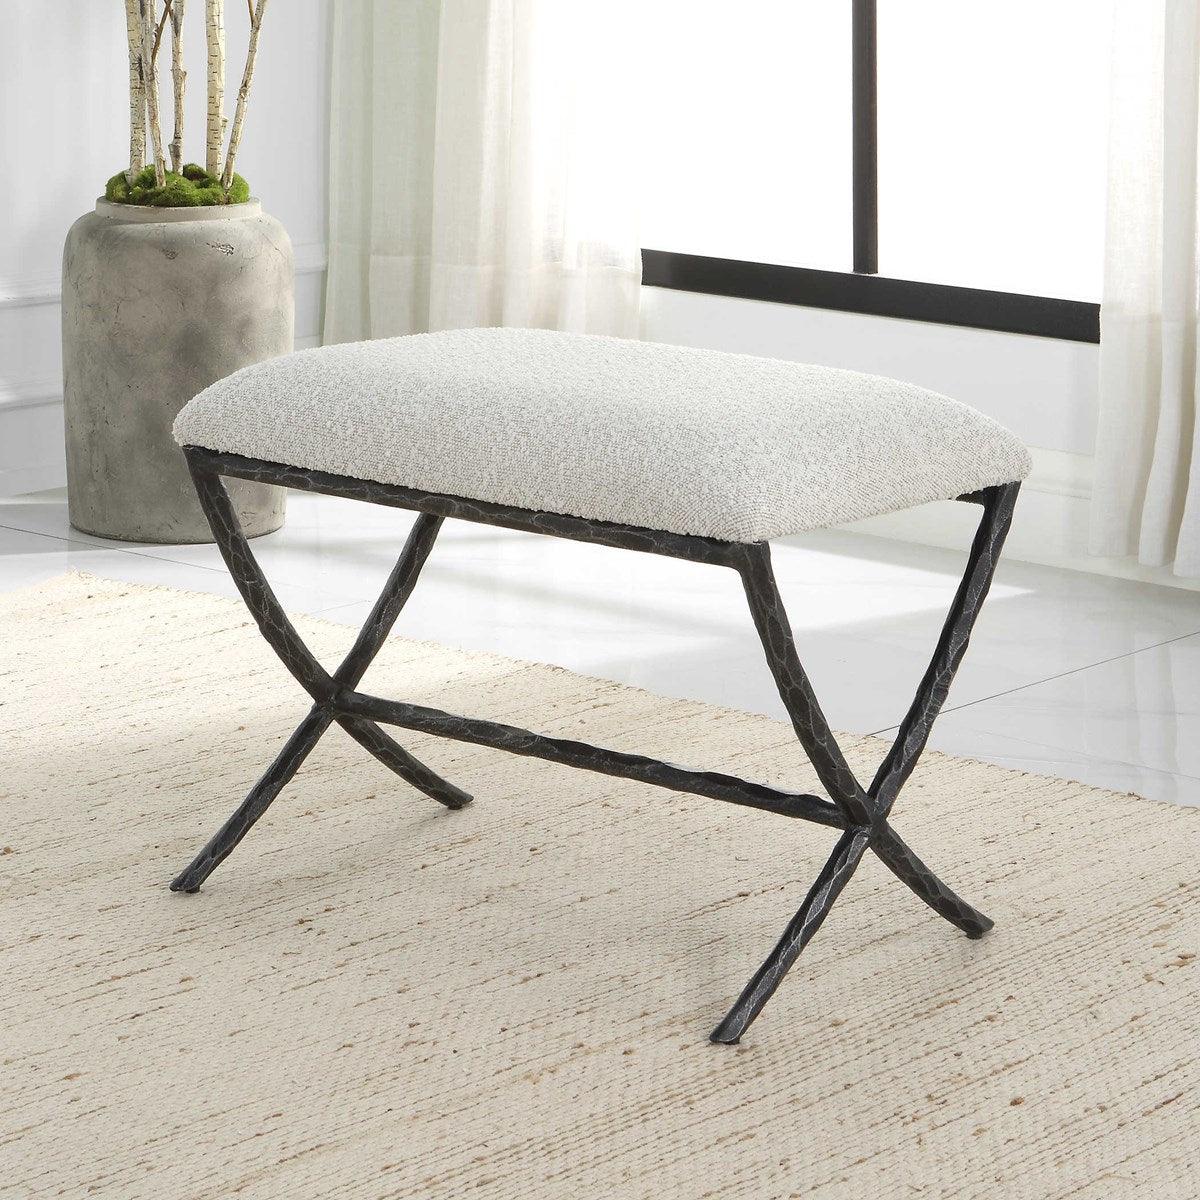 The Uttermost - Brisby Bench - 23750 | Montreal Lighting & Hardware